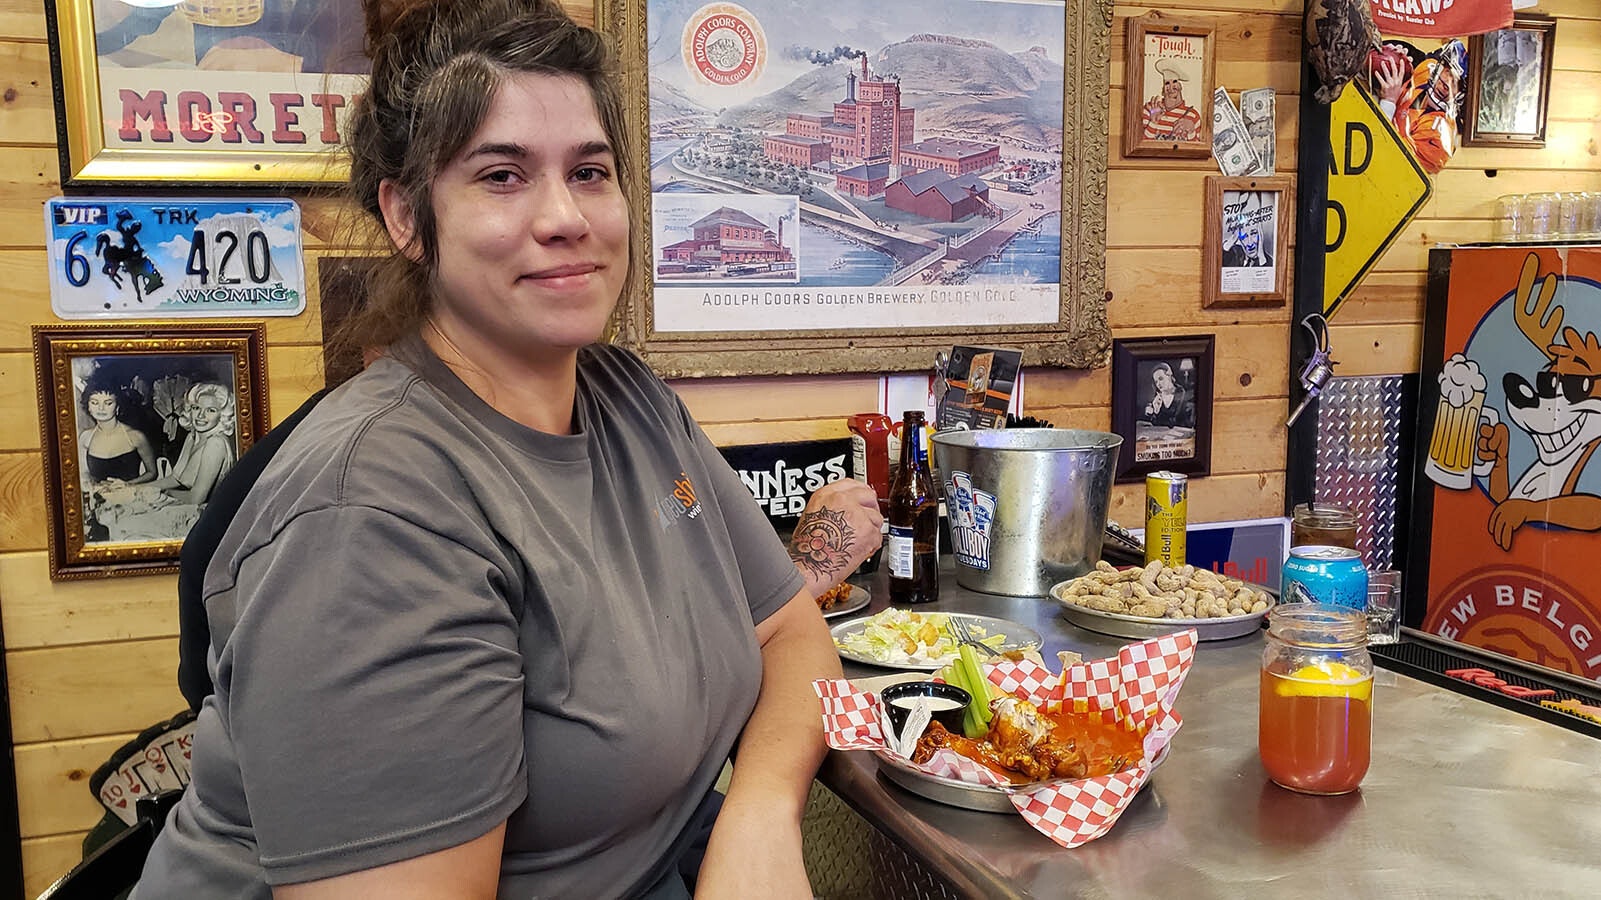 Nicole Espinoza wants more people to know that Rawlins has a rich history and great outdoor activities just minutes away.